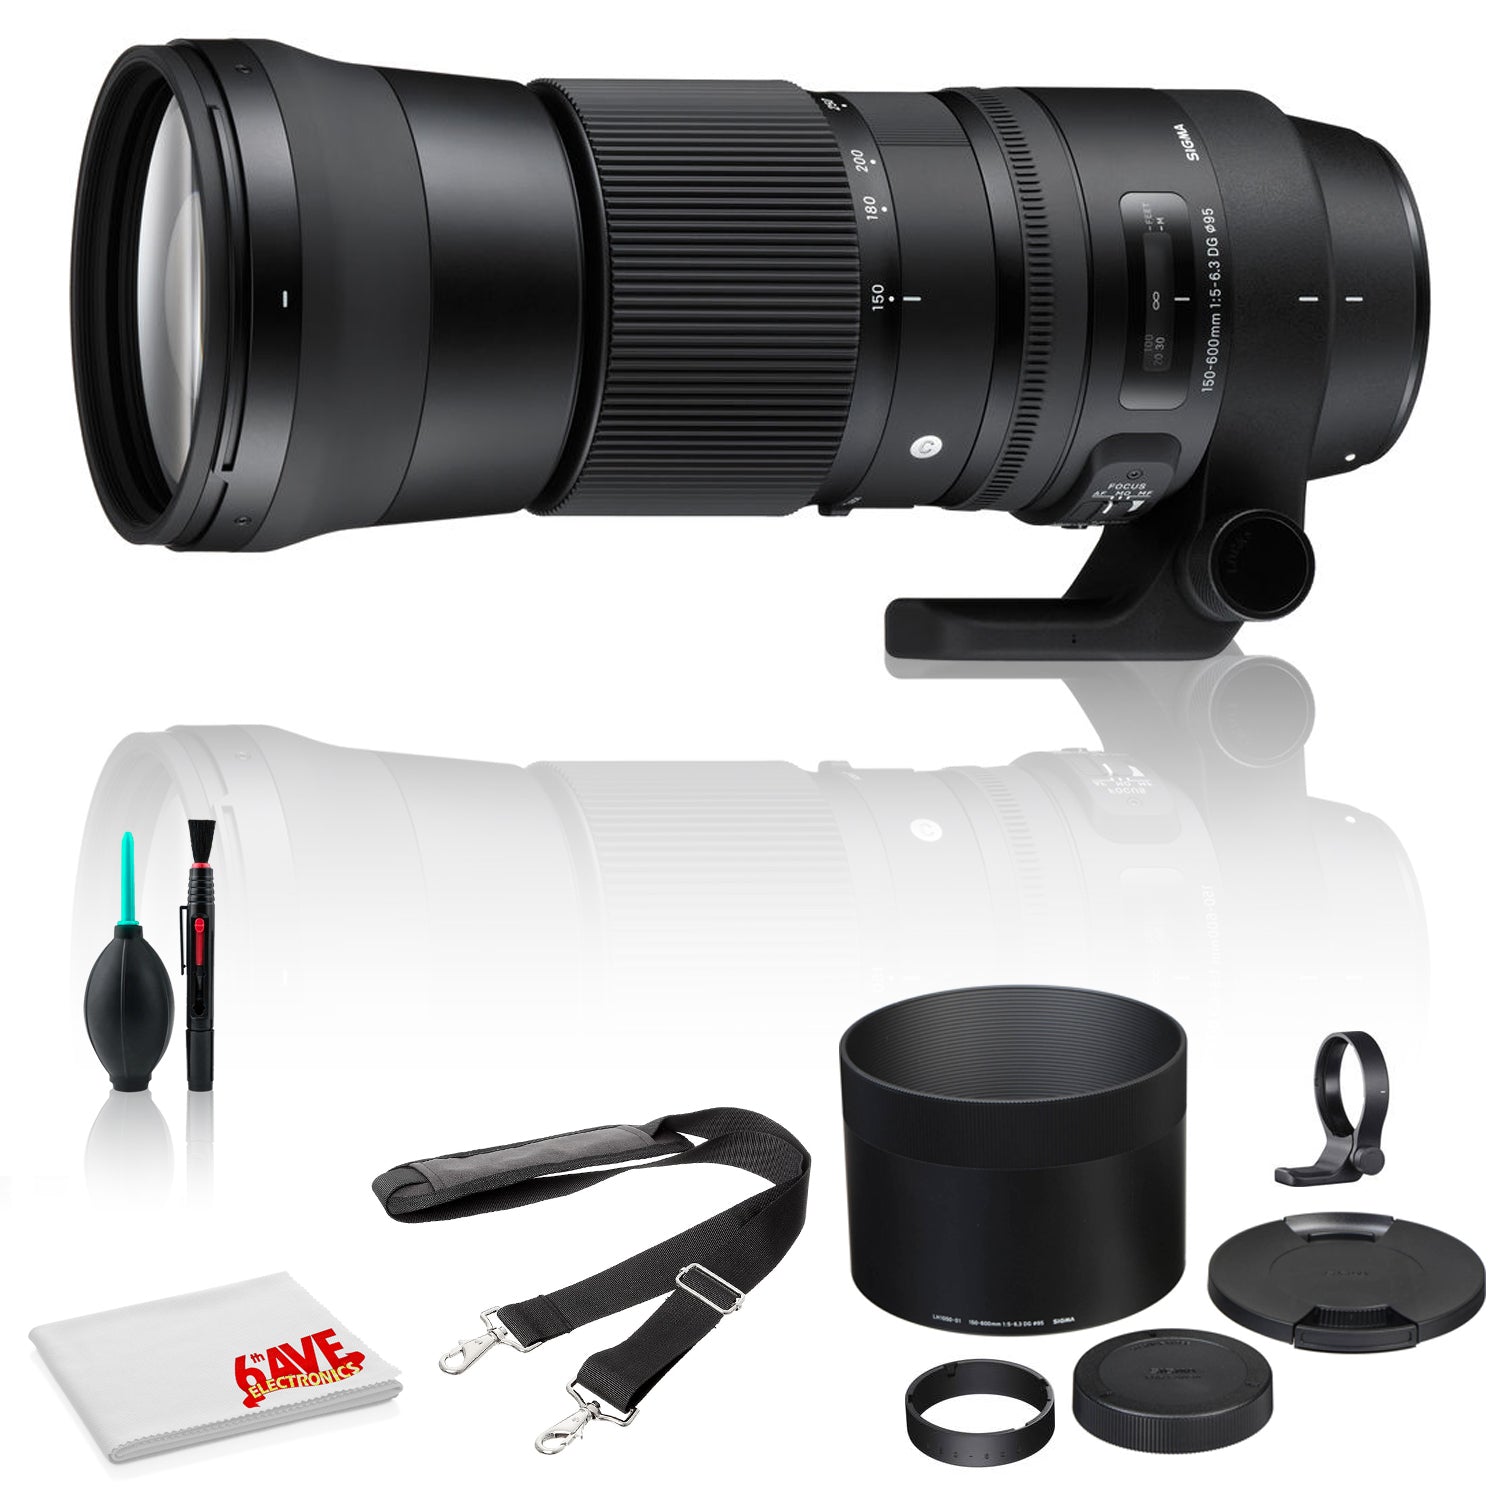 Sigma 150-600mm f/5-6.3 DG OS HSM Lens for Canon EF (USA) Deluxe Bundle